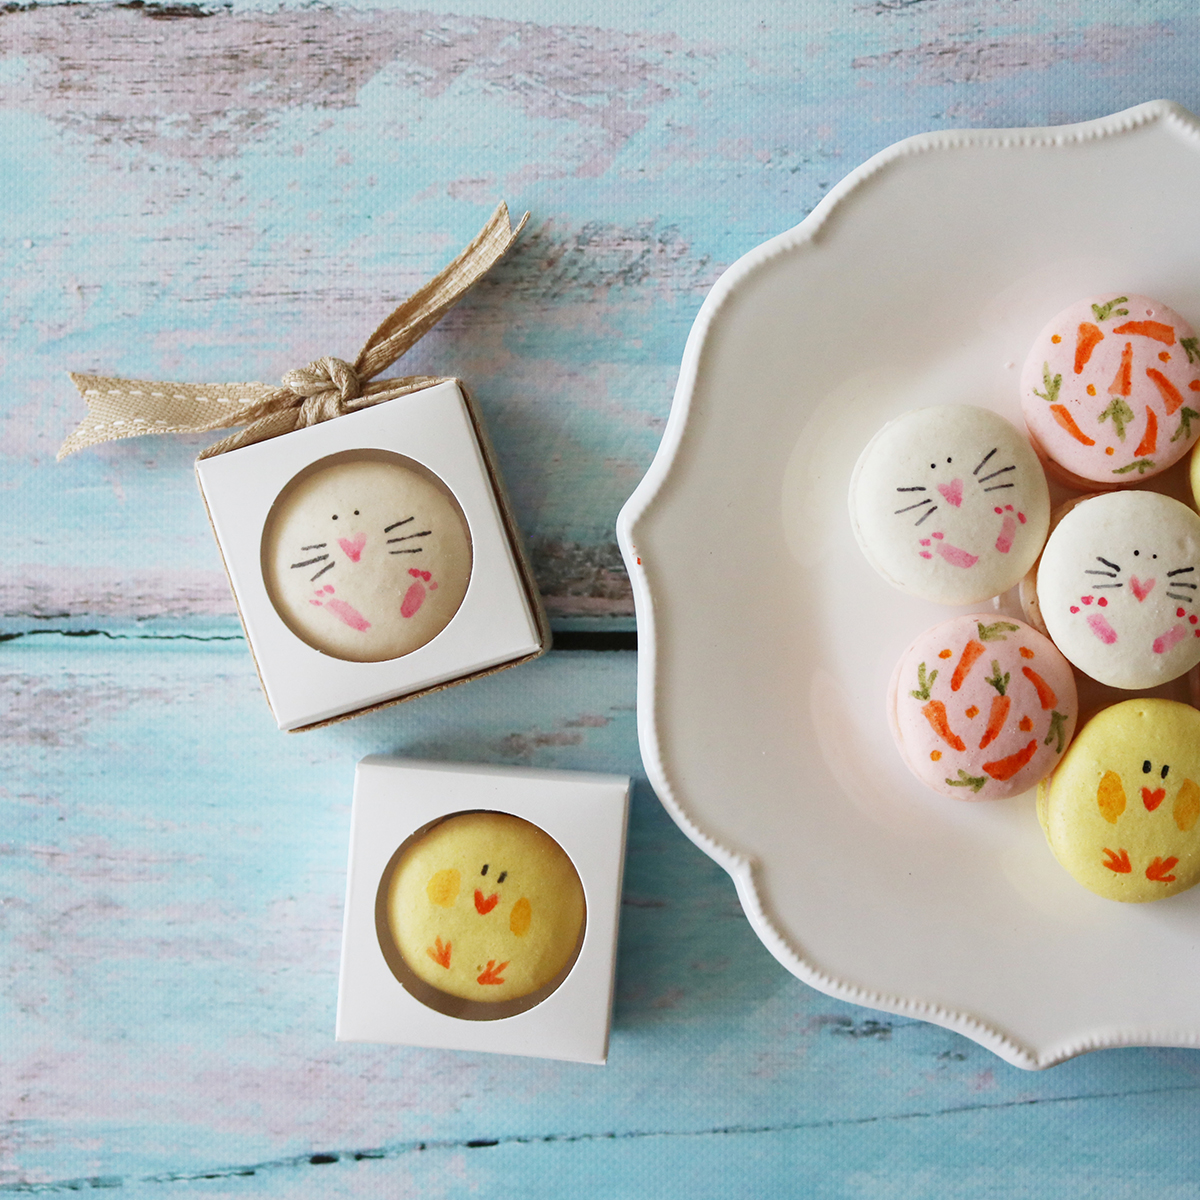 diy sweet ideas for entertaining and favors - painted macarons | Lorrie Everitt Studio